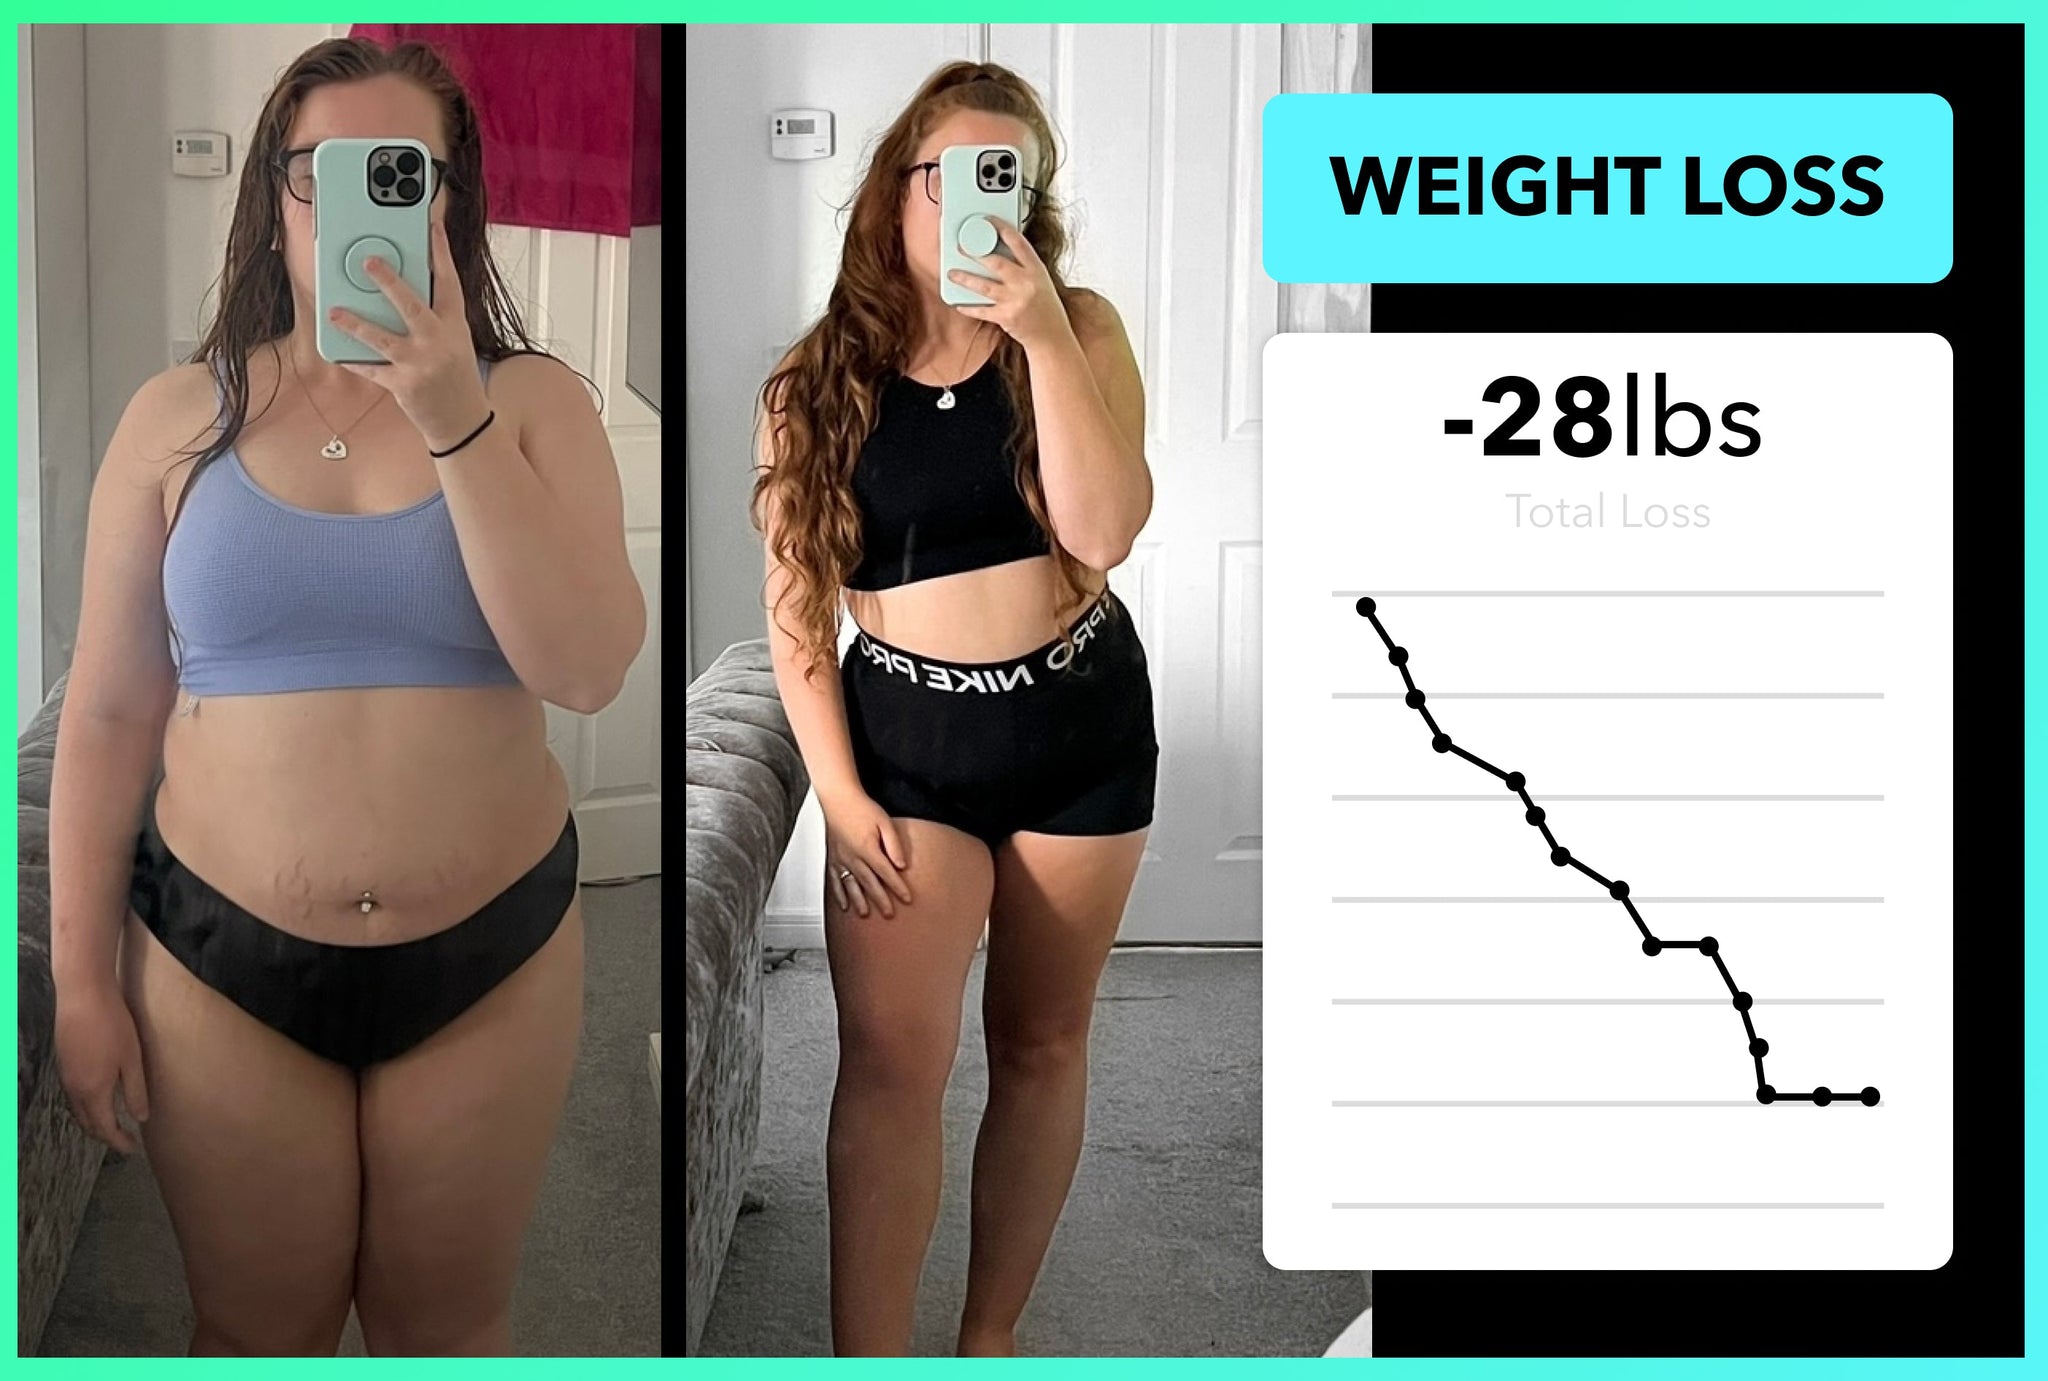 This is how Jessica lost 28lbs with Team RH!